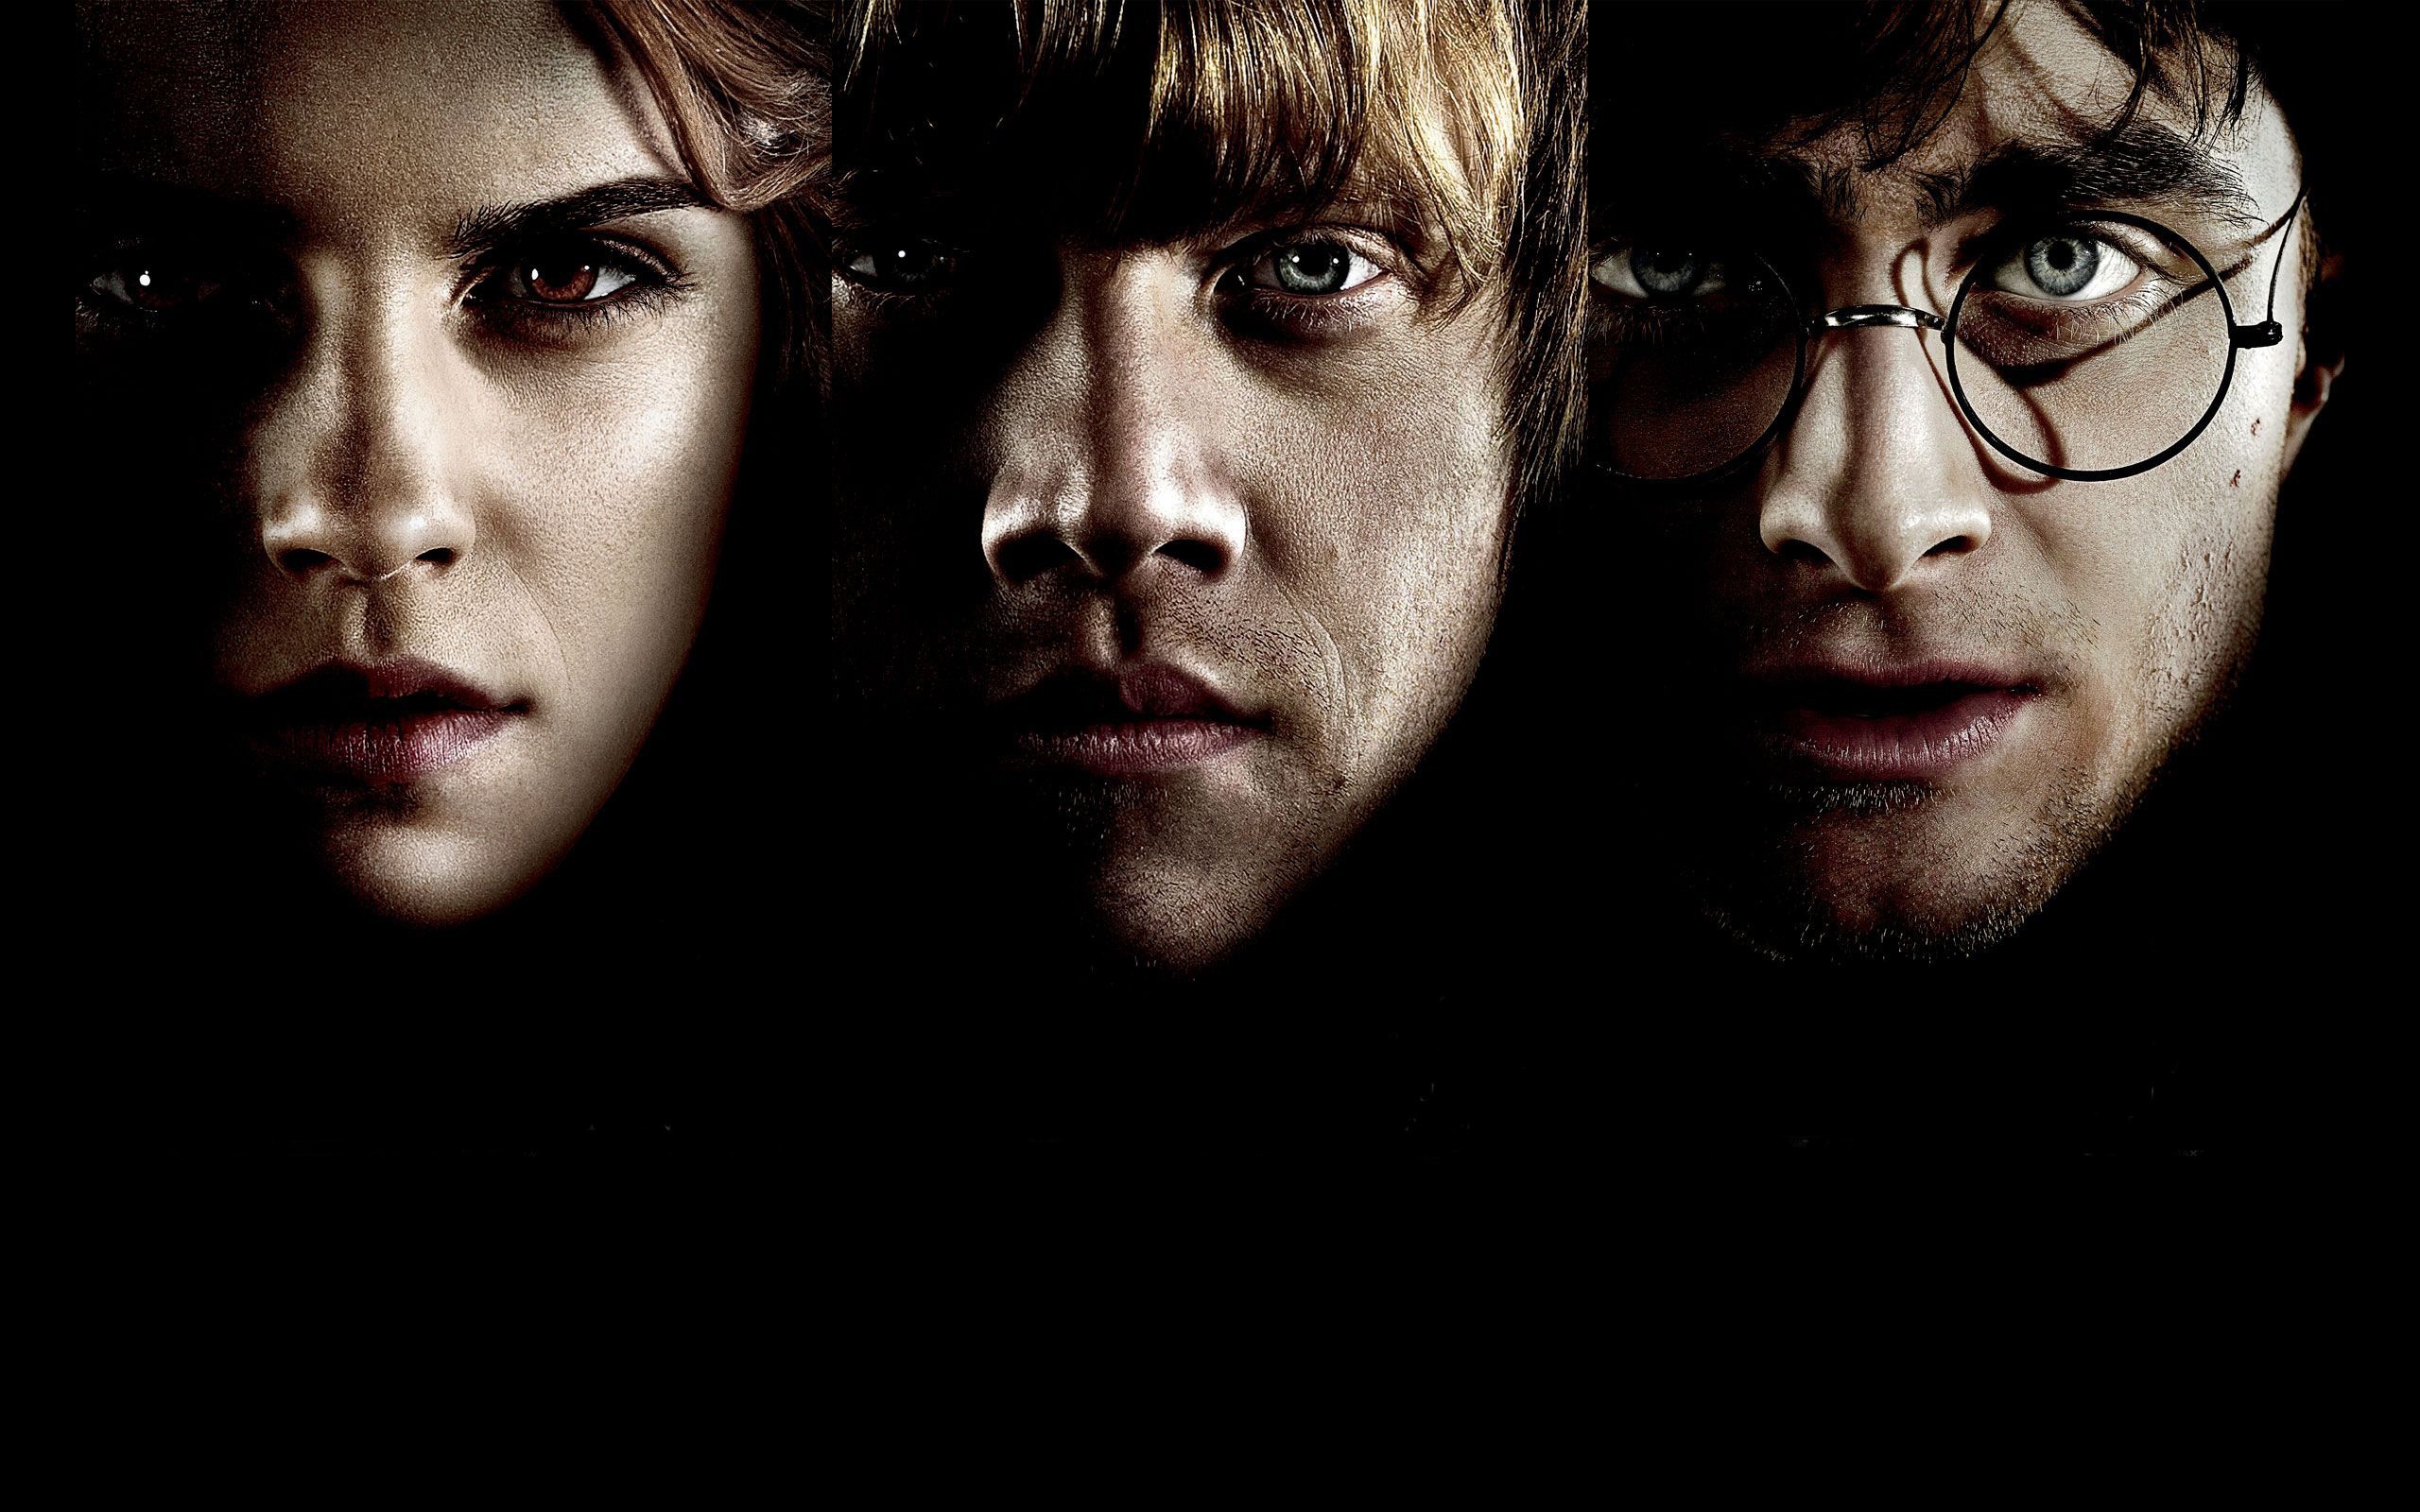  Harry Potter wallpapers and images   wallpapers pictures photos